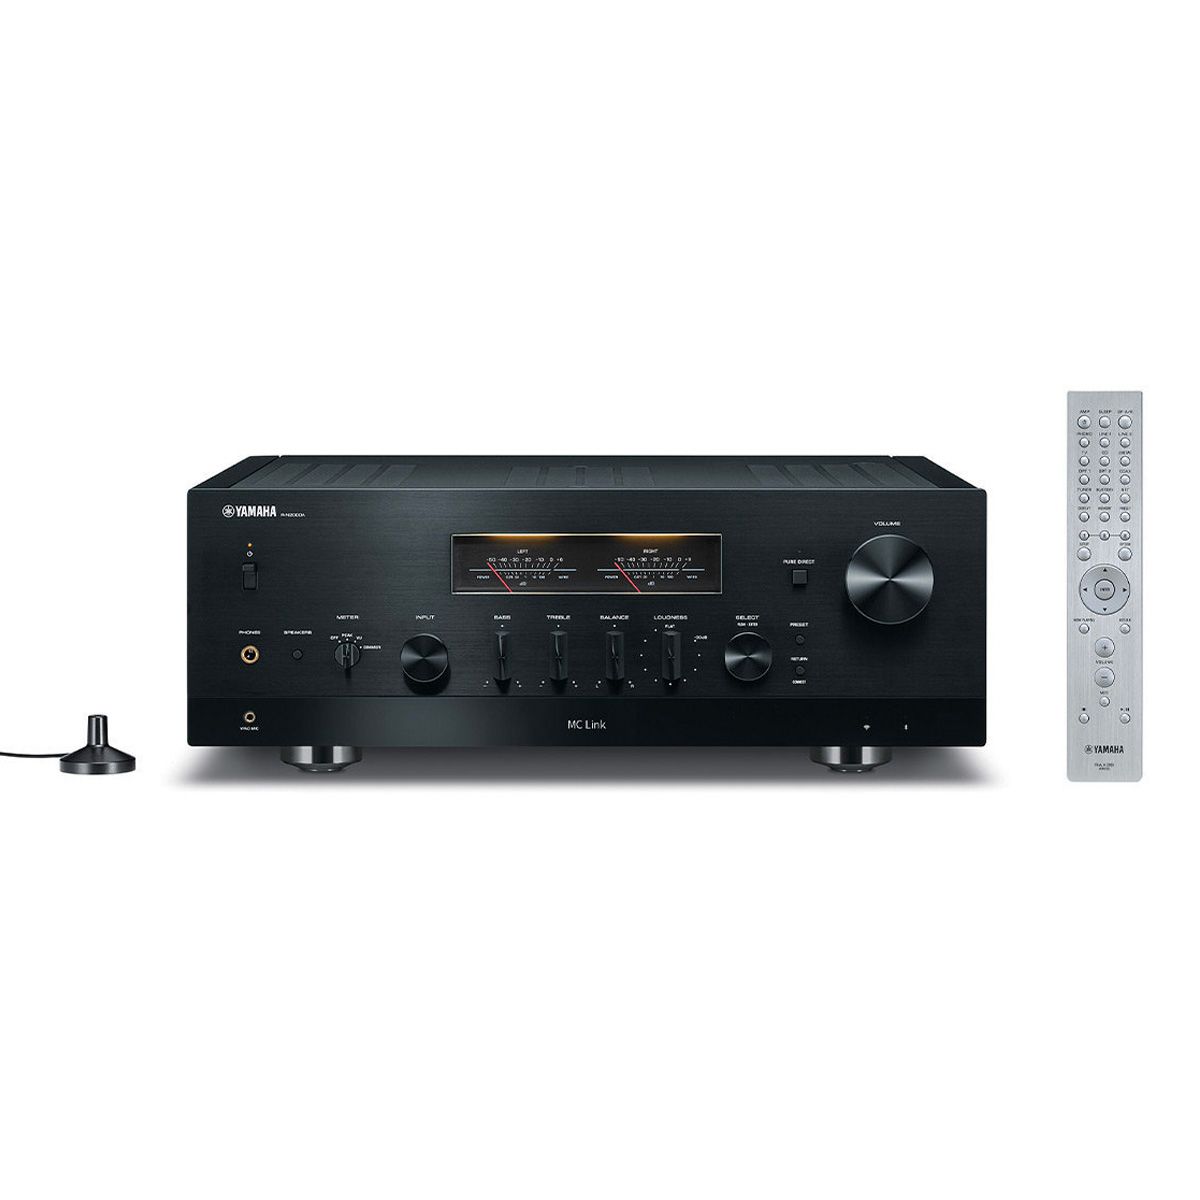 Yamaha R-N2000A Hi-Fi Network Receiver front view with remote and calibration mic